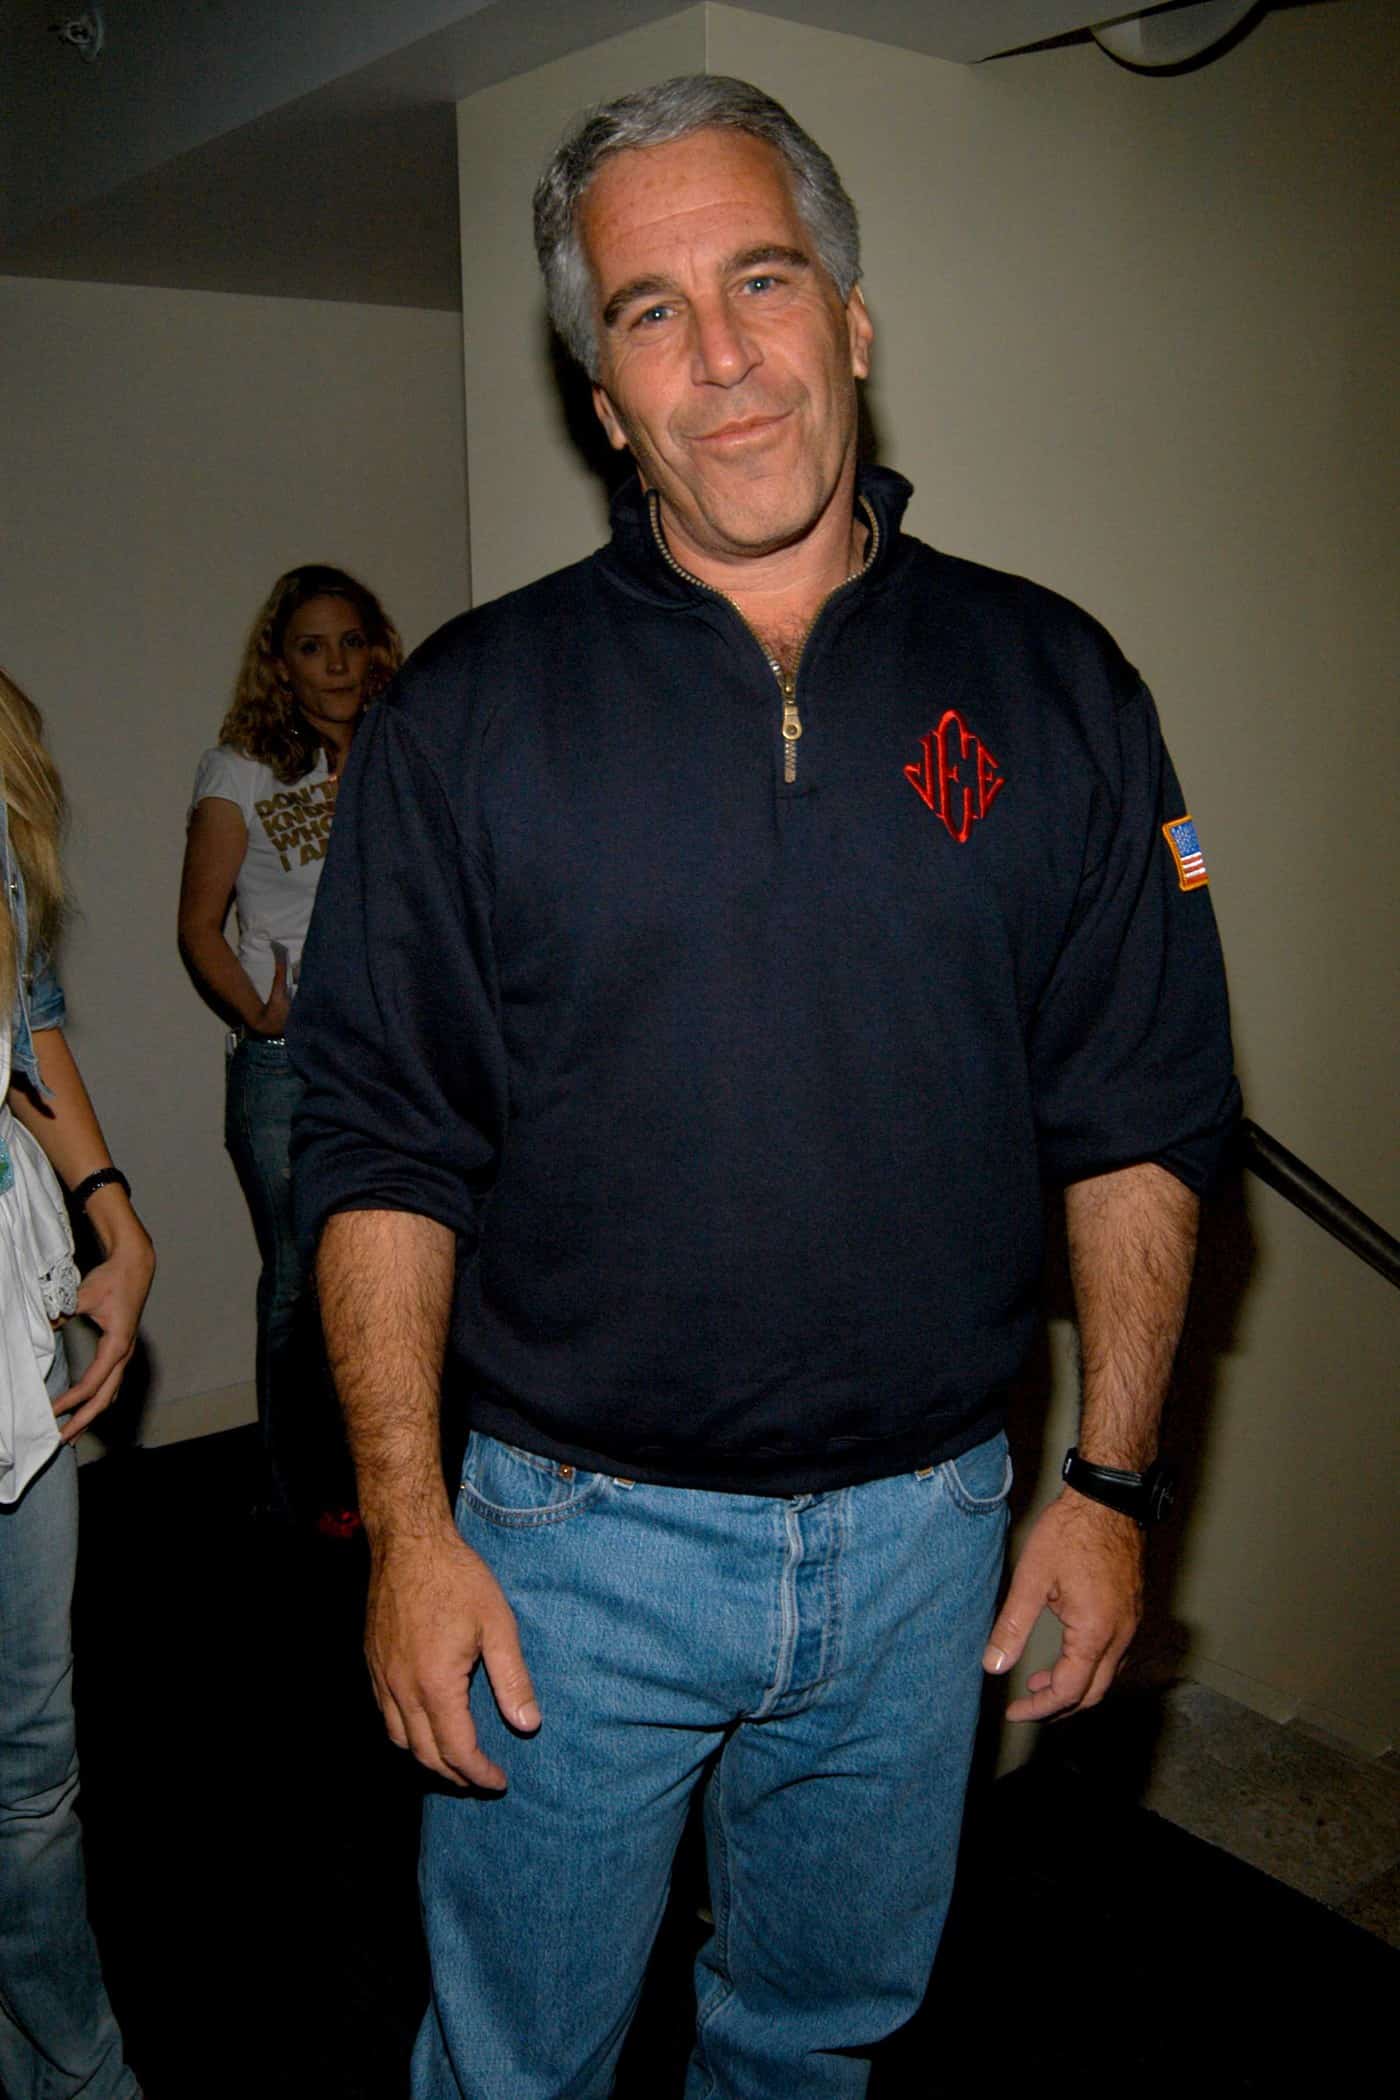 Nike Might Sell Hurley, L Brands Investigates Jeffrey Epstein Connection